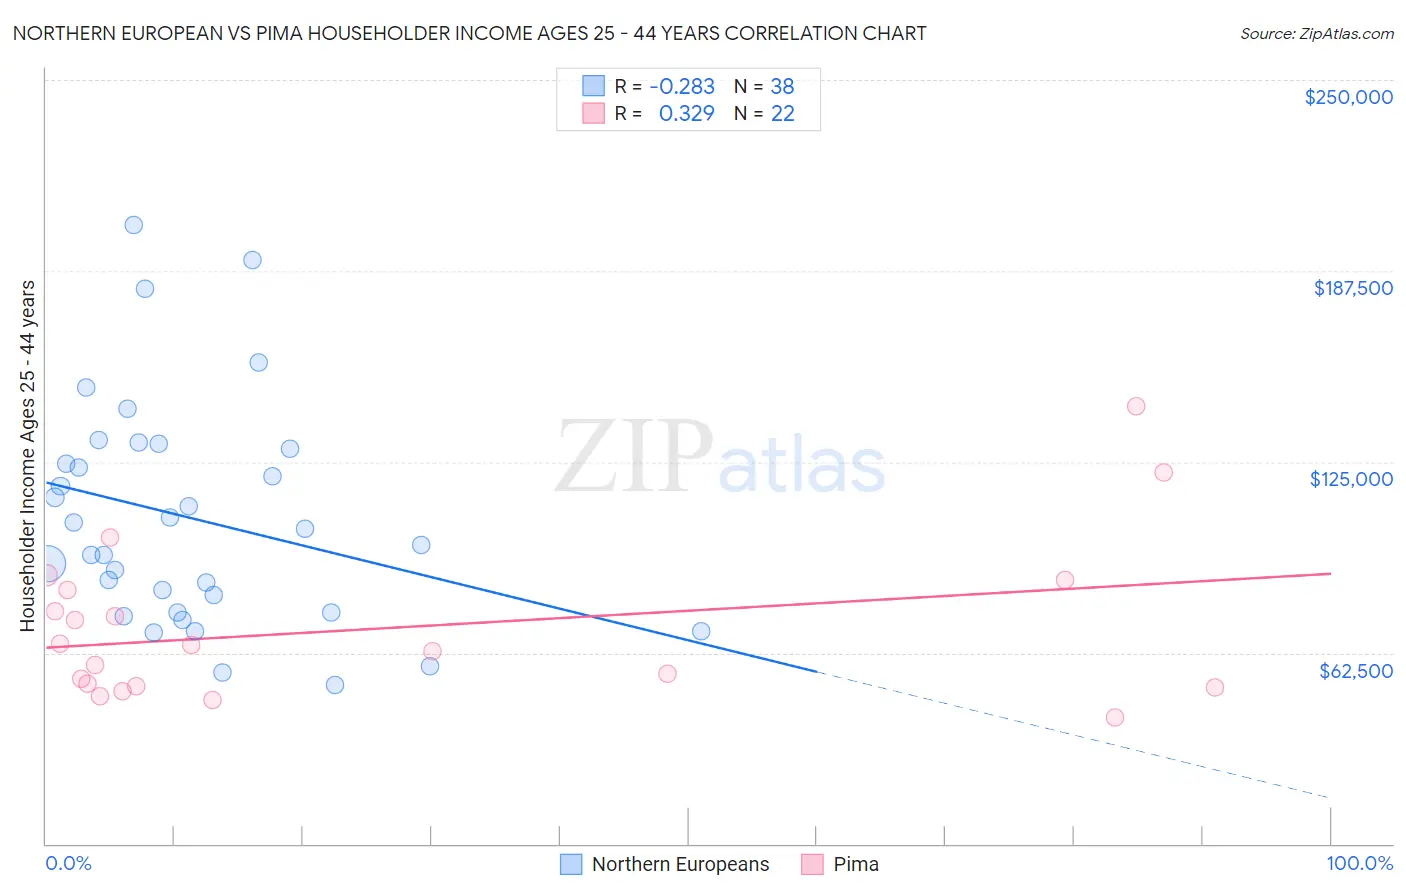 Northern European vs Pima Householder Income Ages 25 - 44 years